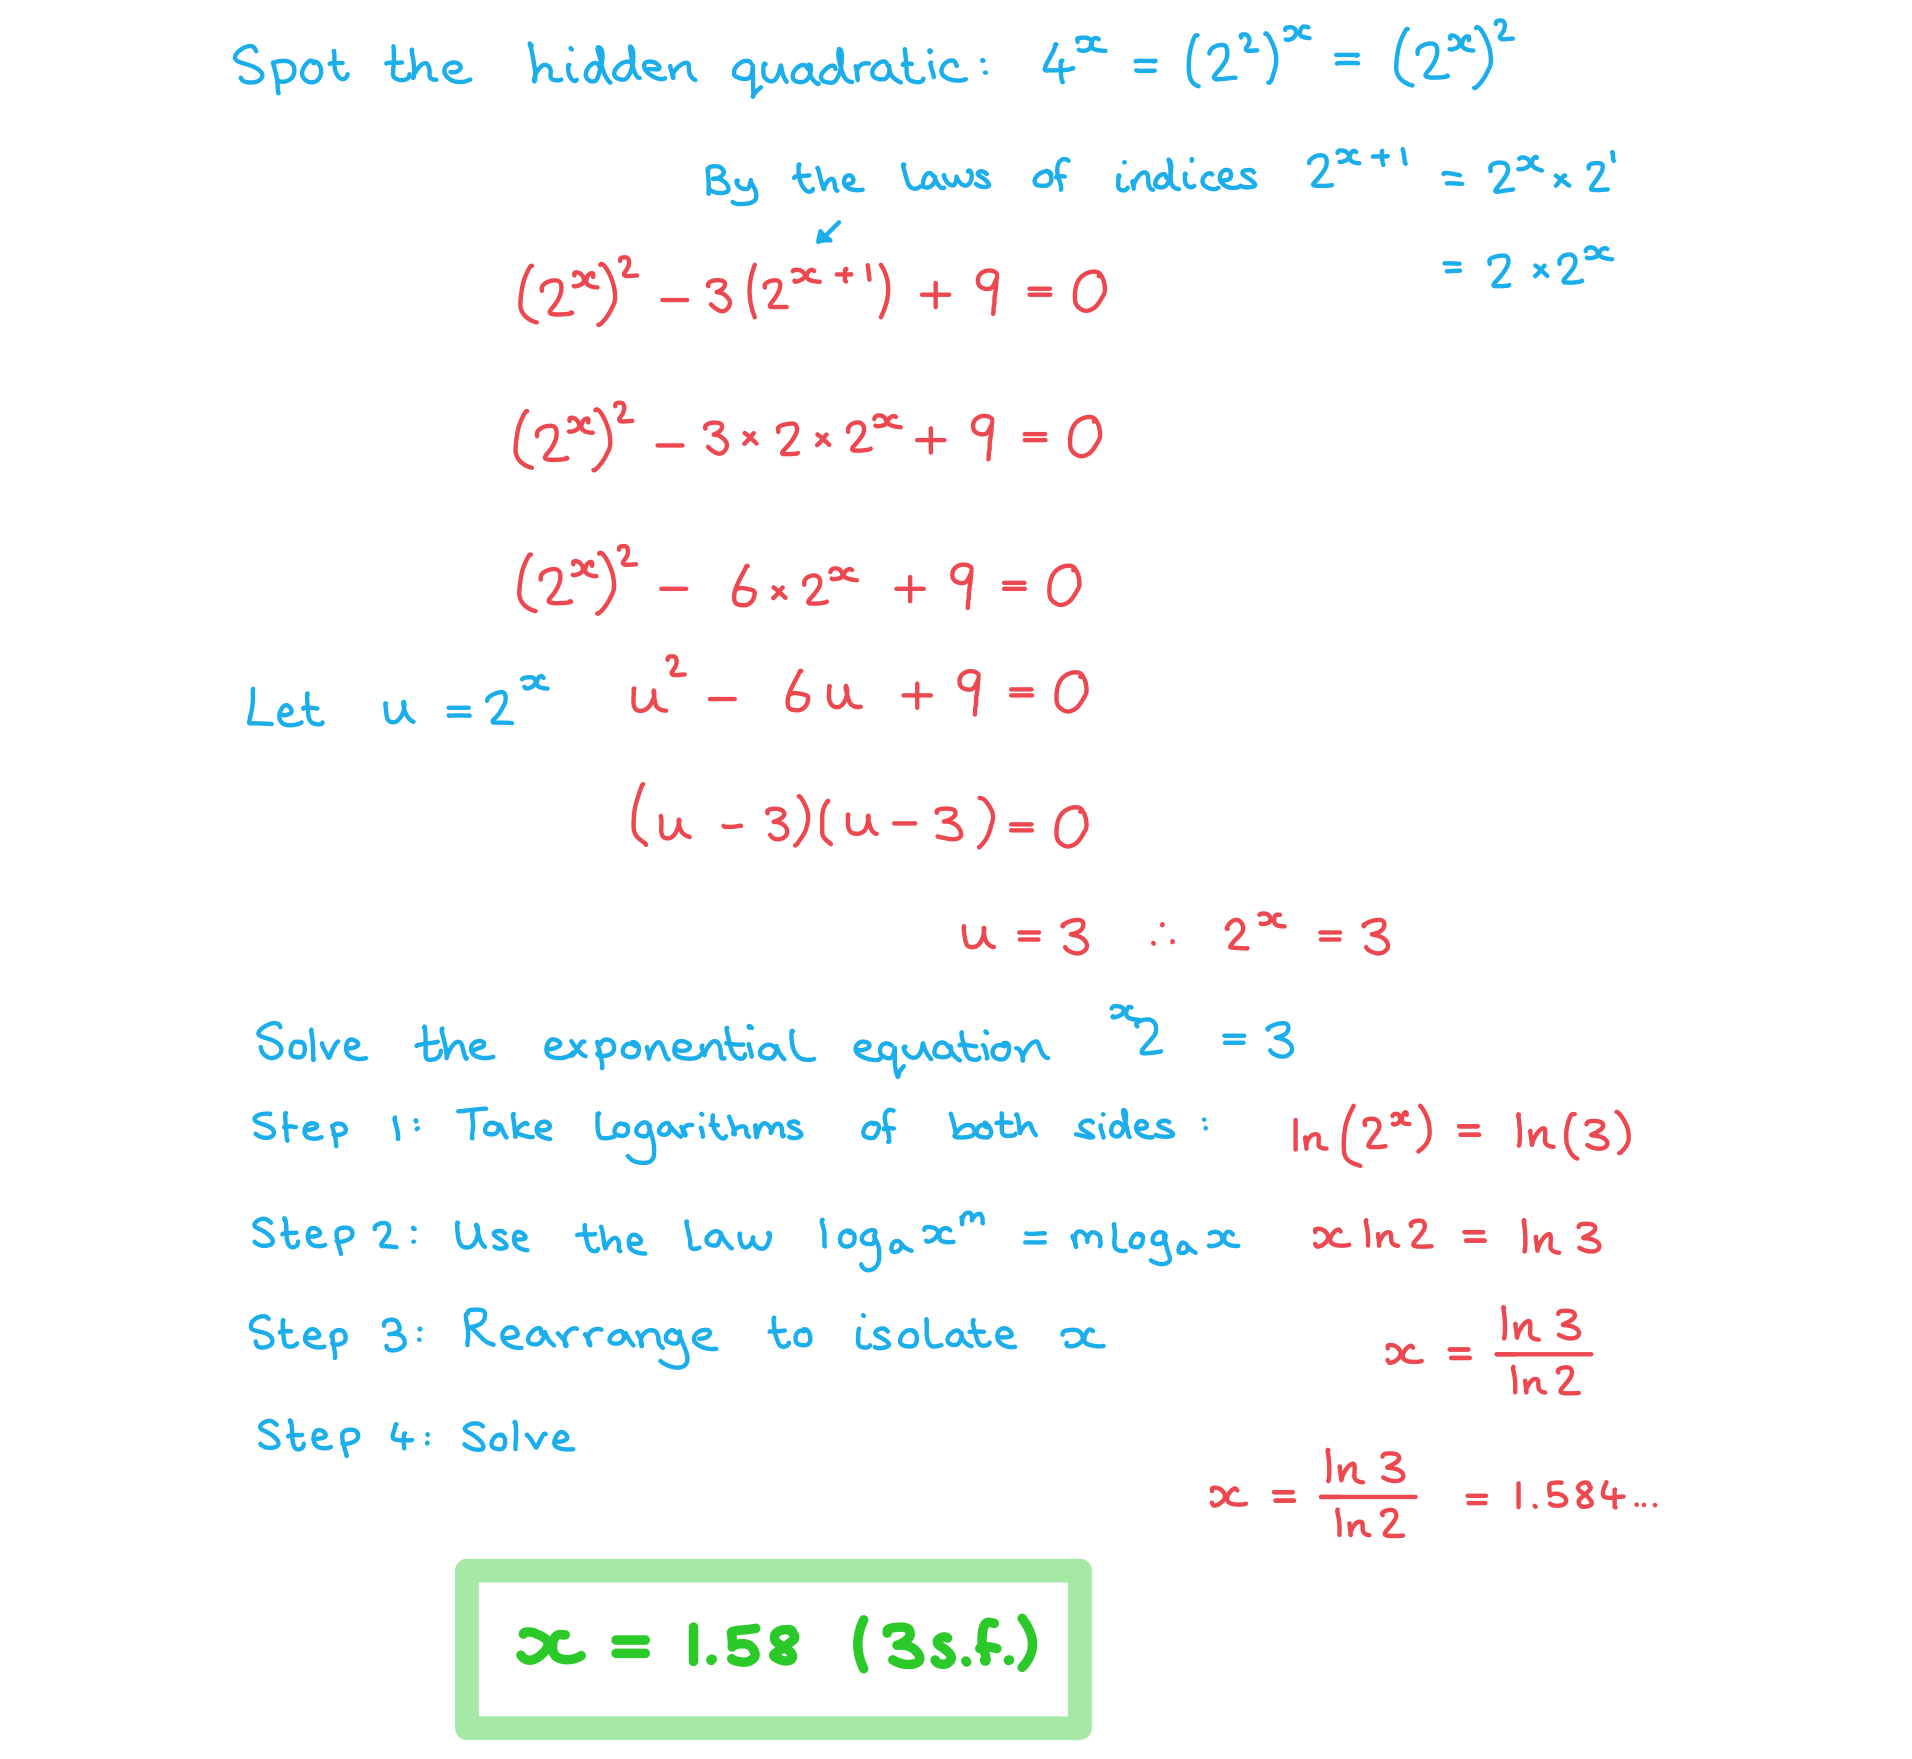 aa-sl-1-2-3-solving-exp-equations-we-solution